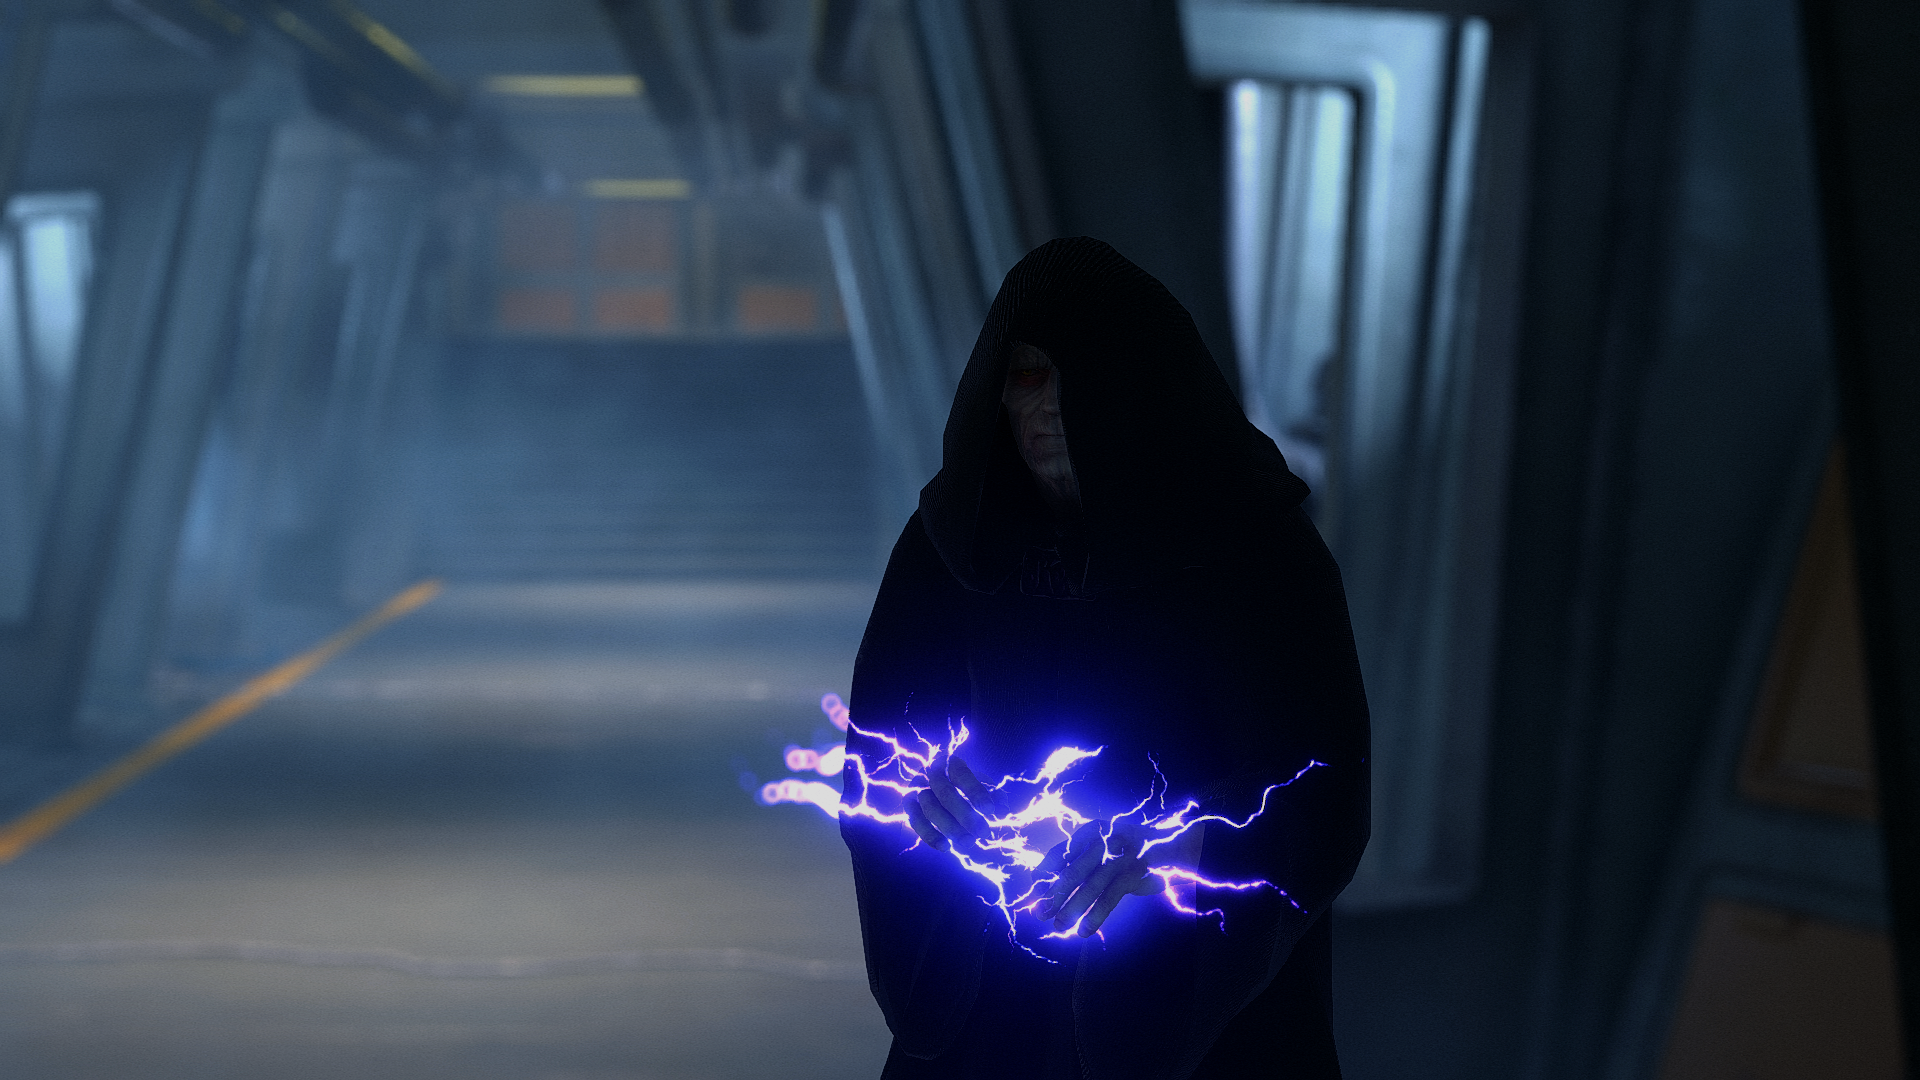 Emperor Palpatine's force lighting HD Wallpaper. Background Image